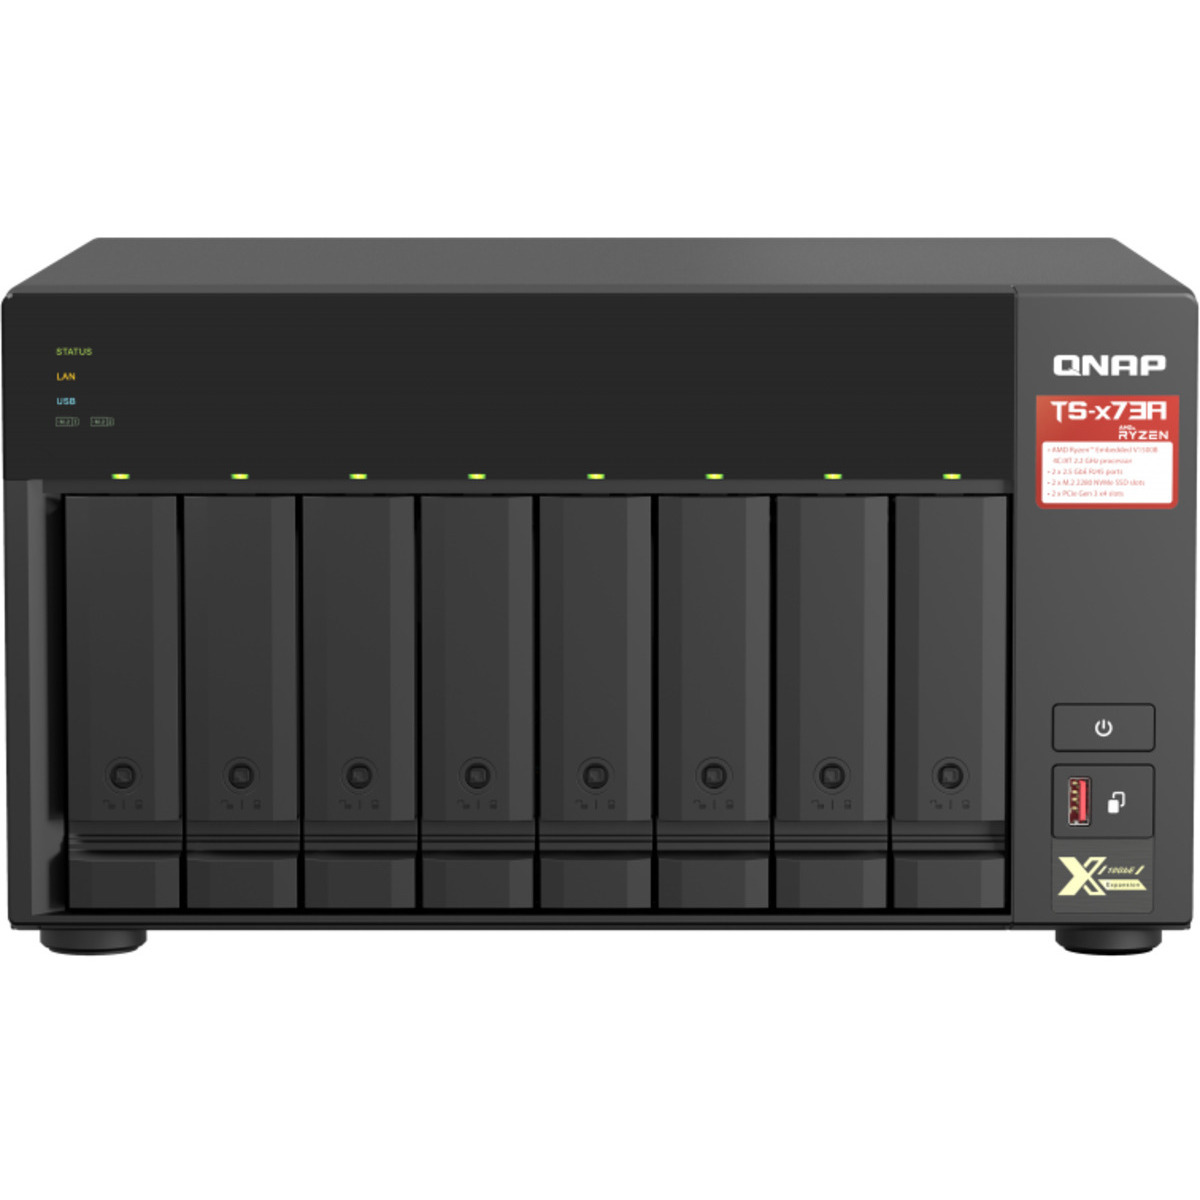 QNAP TS-873A 112tb 8-Bay Desktop Multimedia / Power User / Business NAS - Network Attached Storage Device 7x16tb Seagate EXOS X18 ST16000NM000J 3.5 7200rpm SATA 6Gb/s HDD ENTERPRISE Class Drives Installed - Burn-In Tested TS-873A